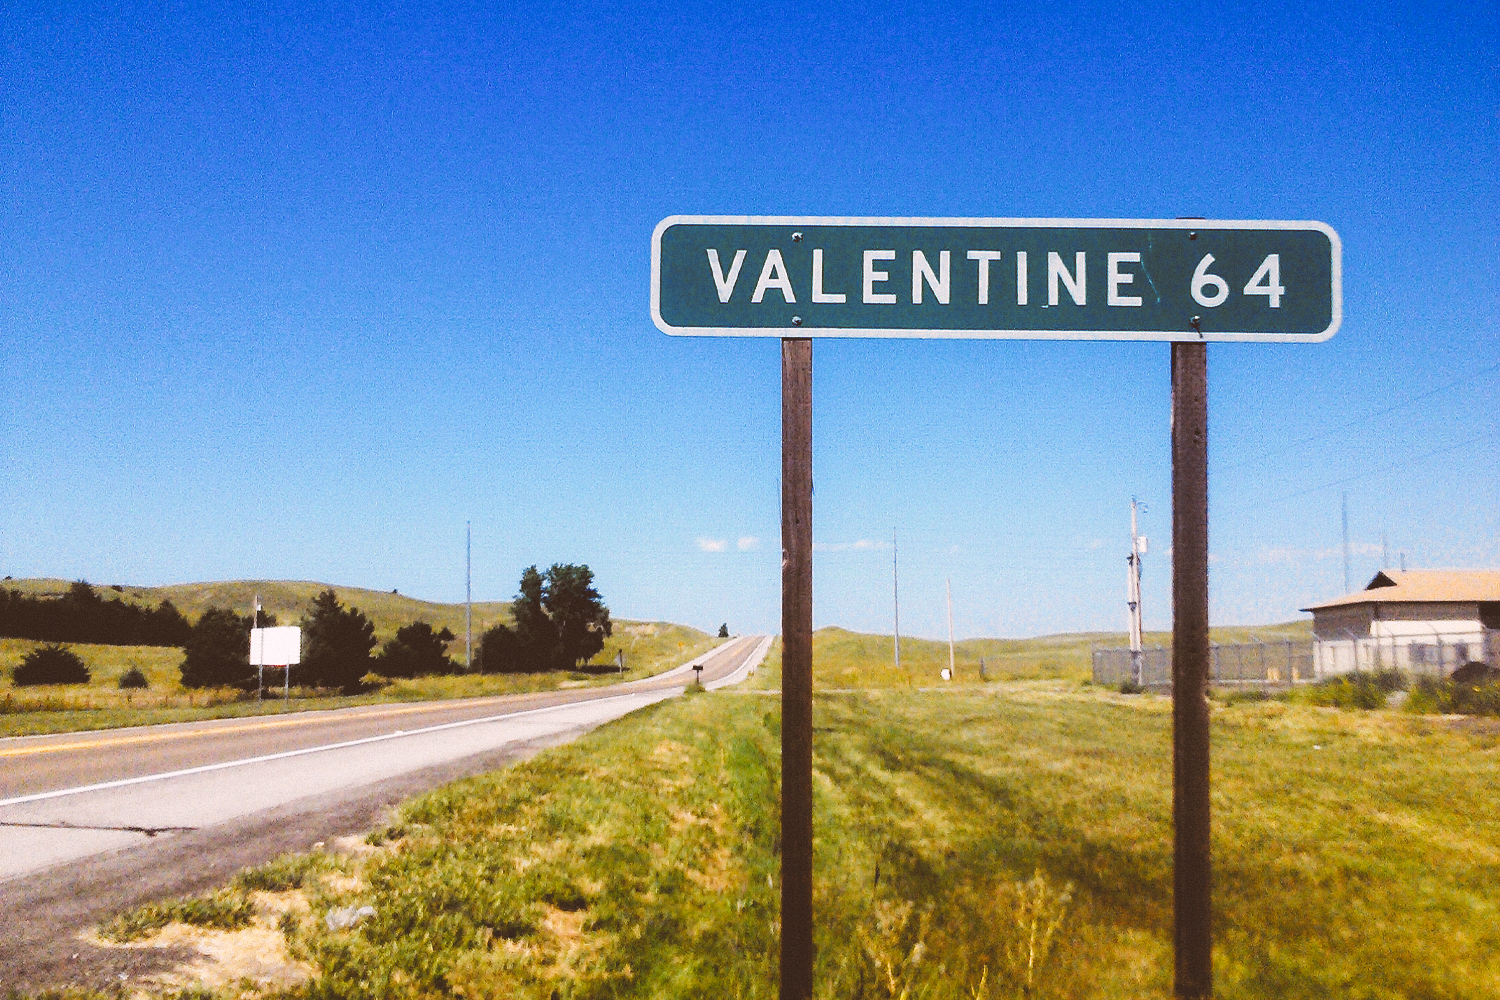 How Four American Towns Called “Valentine” Celebrate on February 14